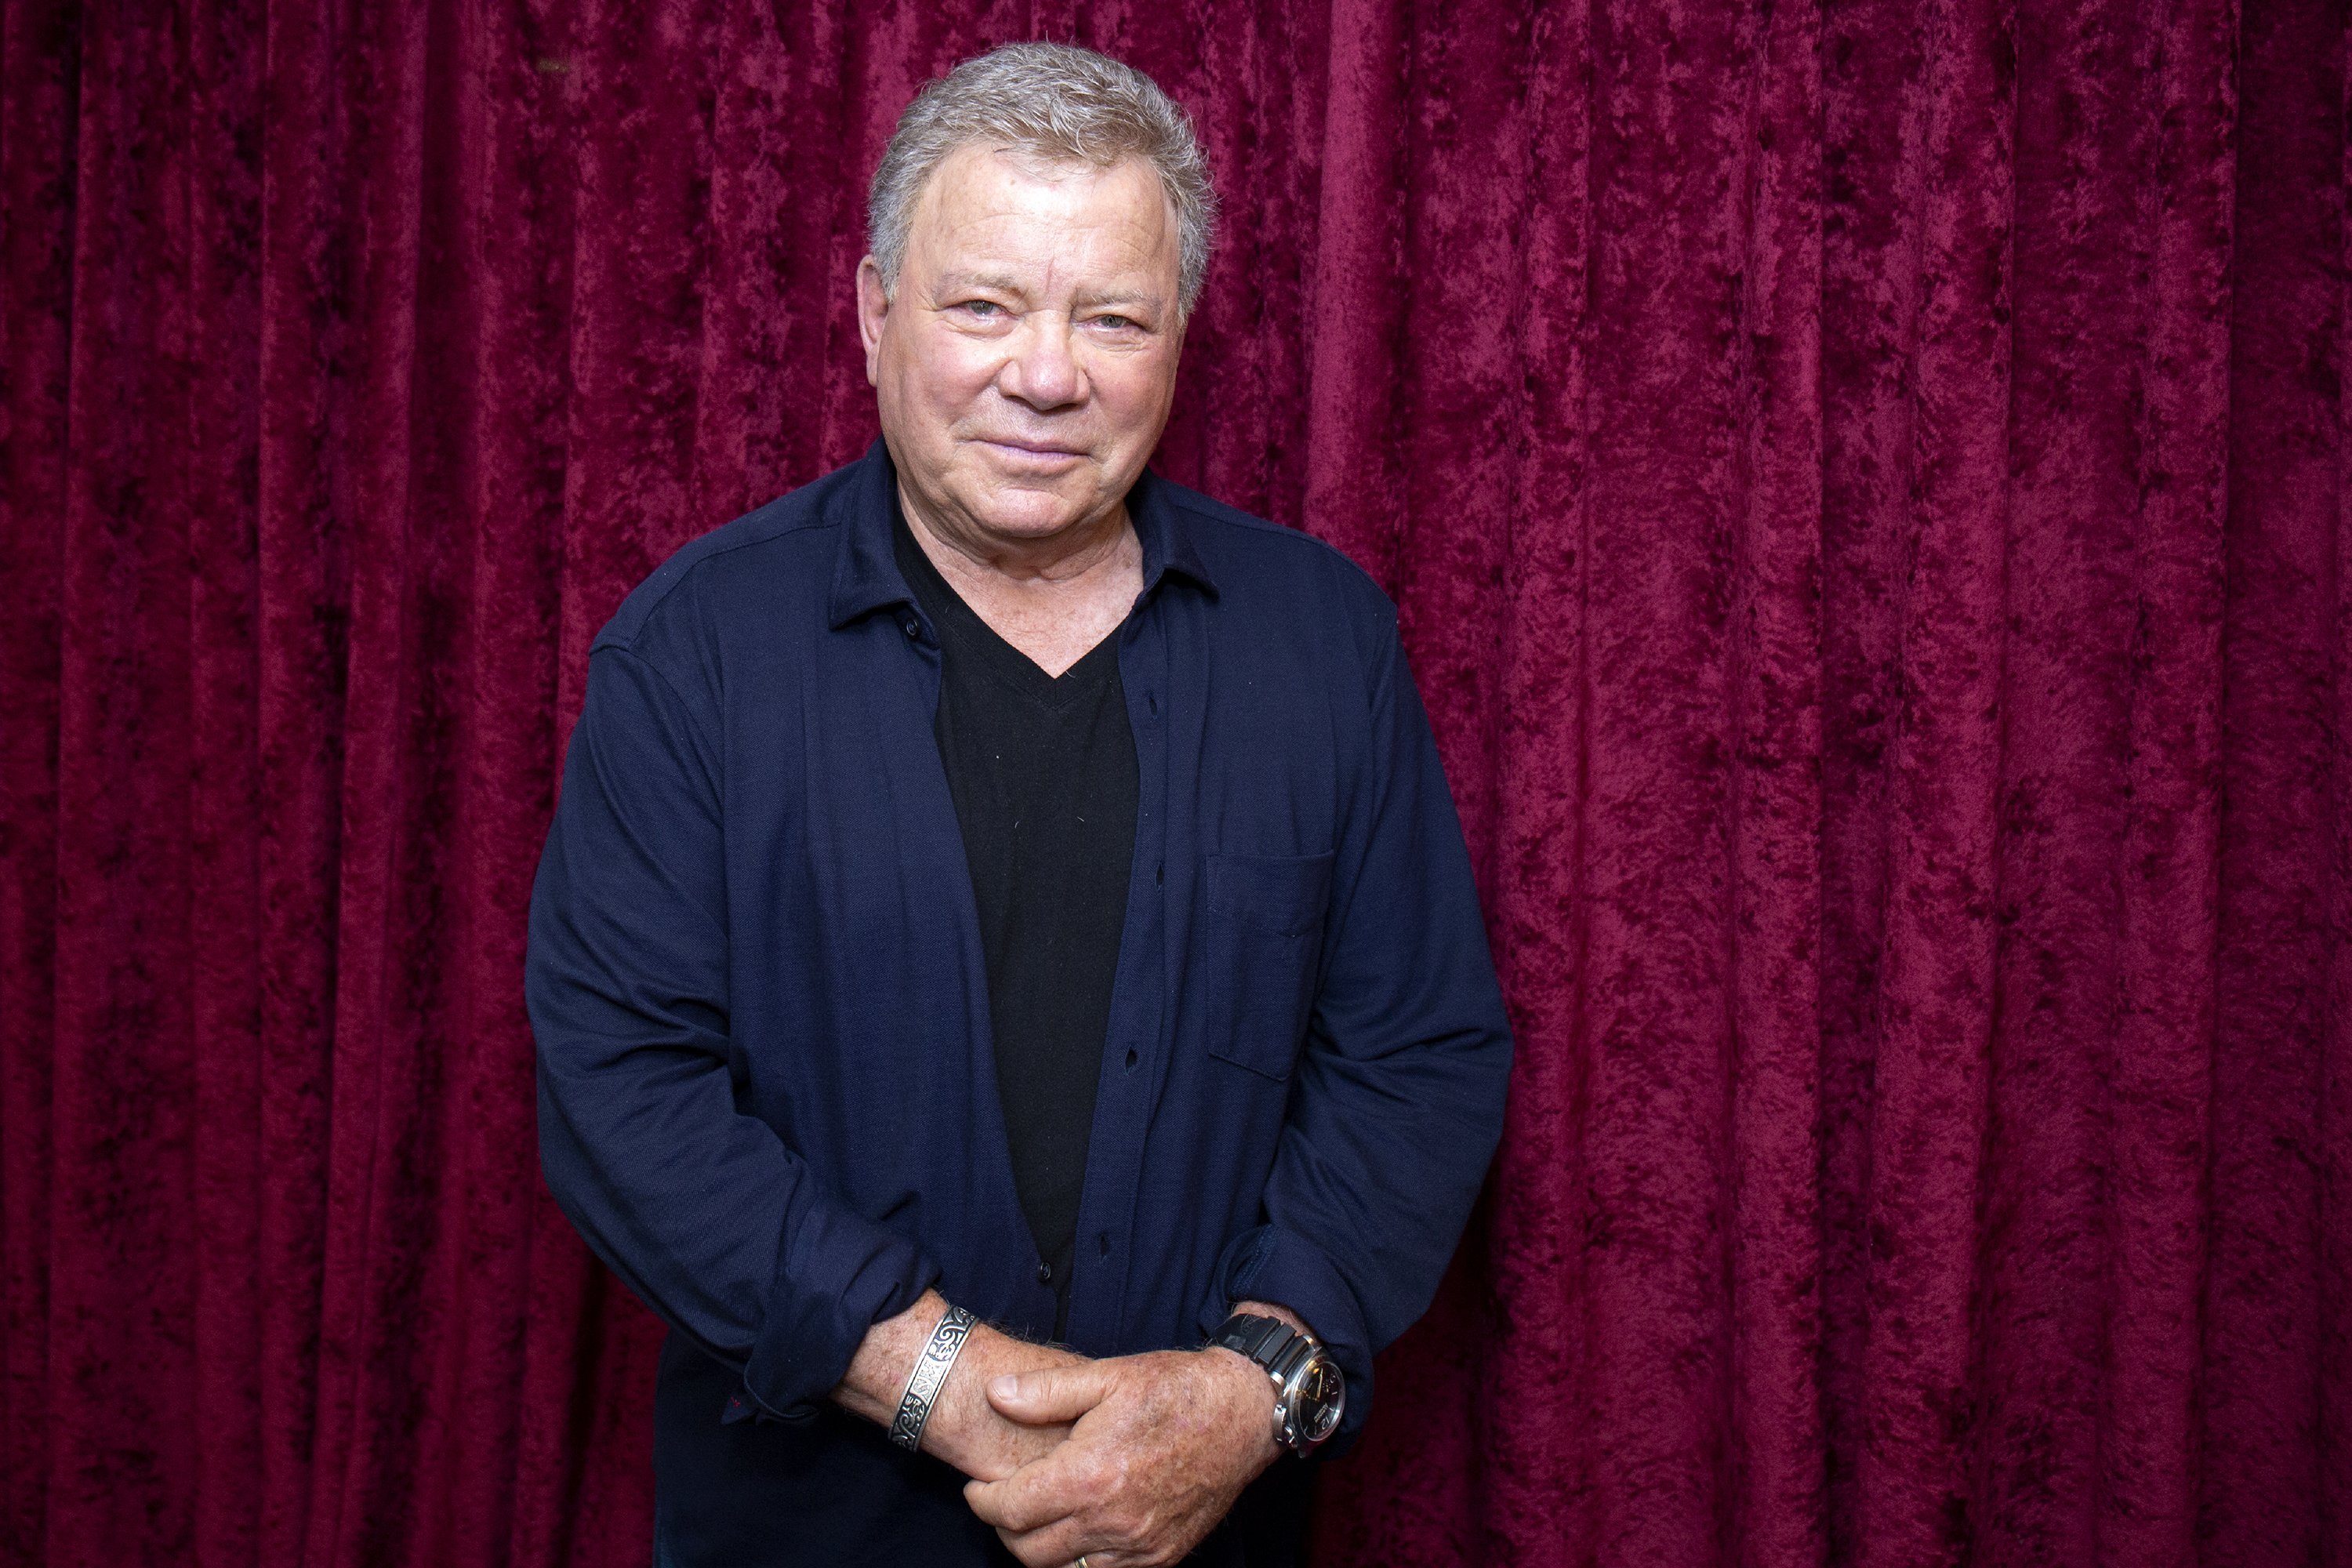 William Shatner visits SiriusXM Studios on September 6, 2018, in New York City. | Source: Getty Images.